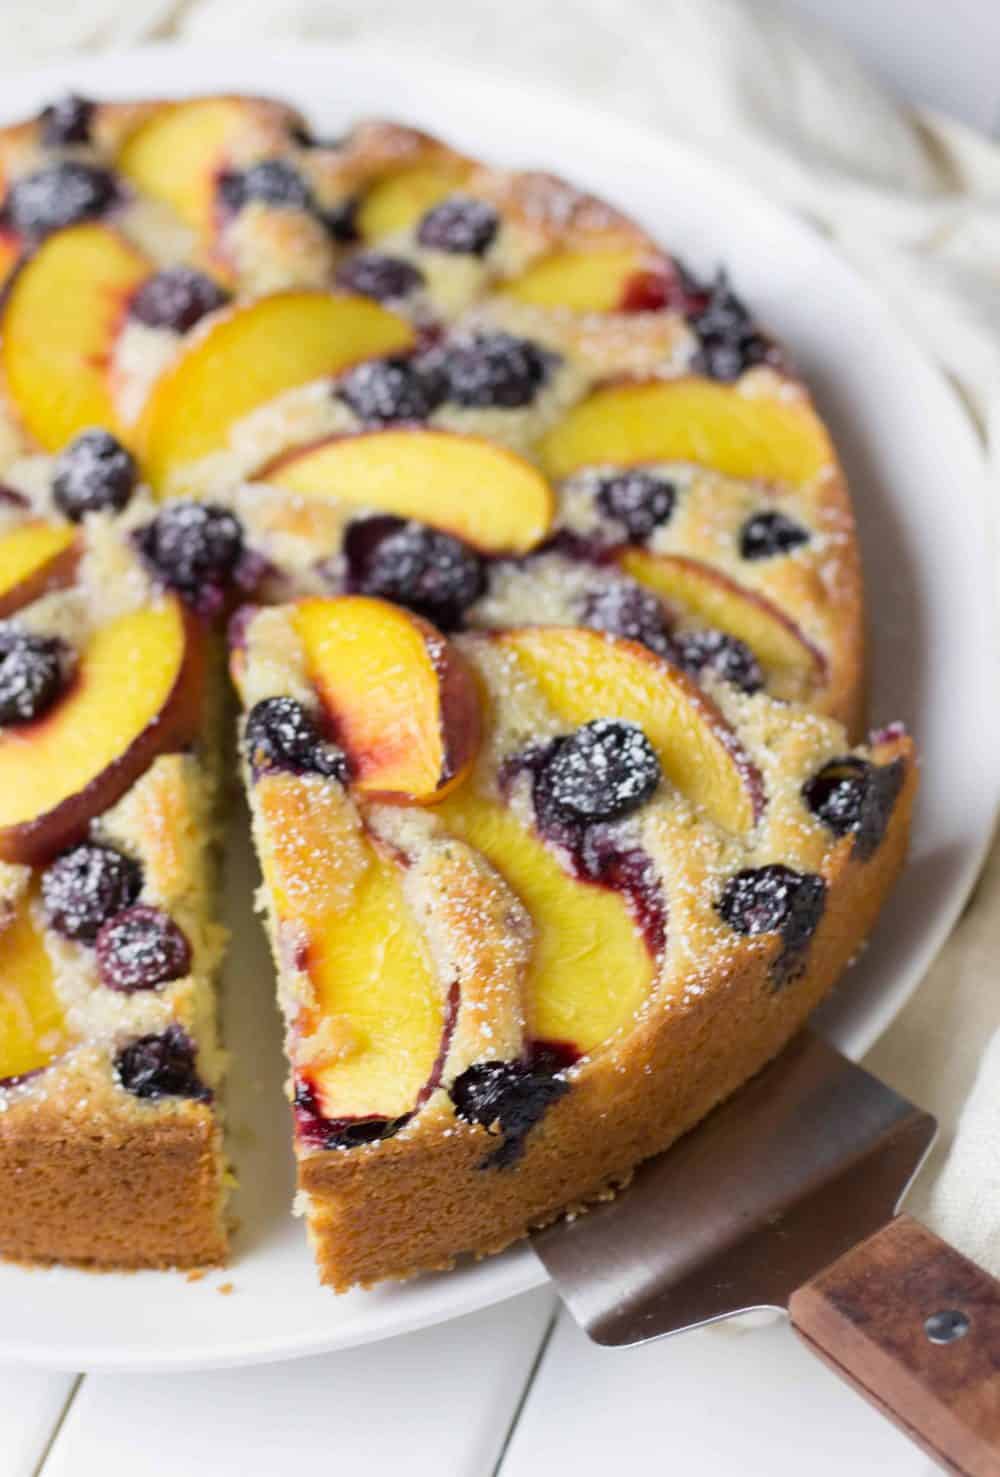 Peach and Blueberry Coffee Cake